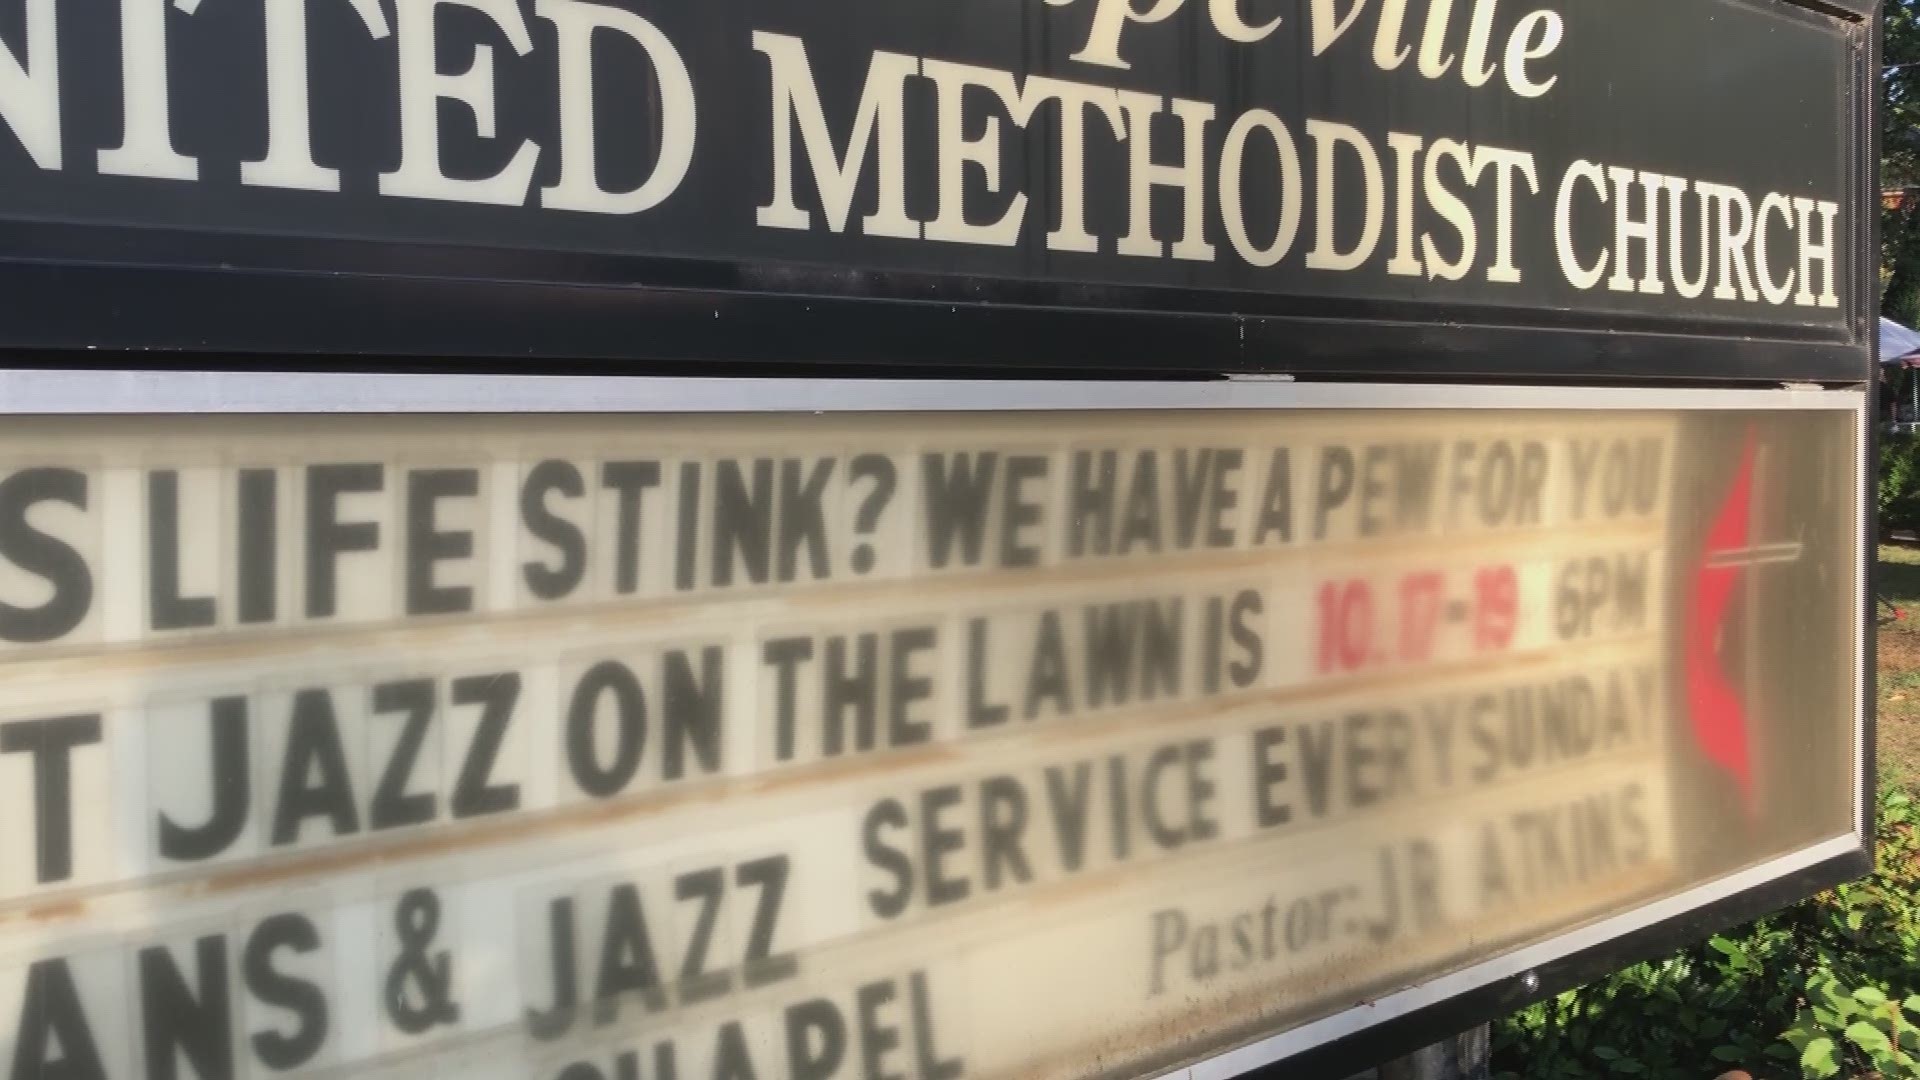 The Hapeville First United Methodist Church concert features 'Jazz on the Lawn'